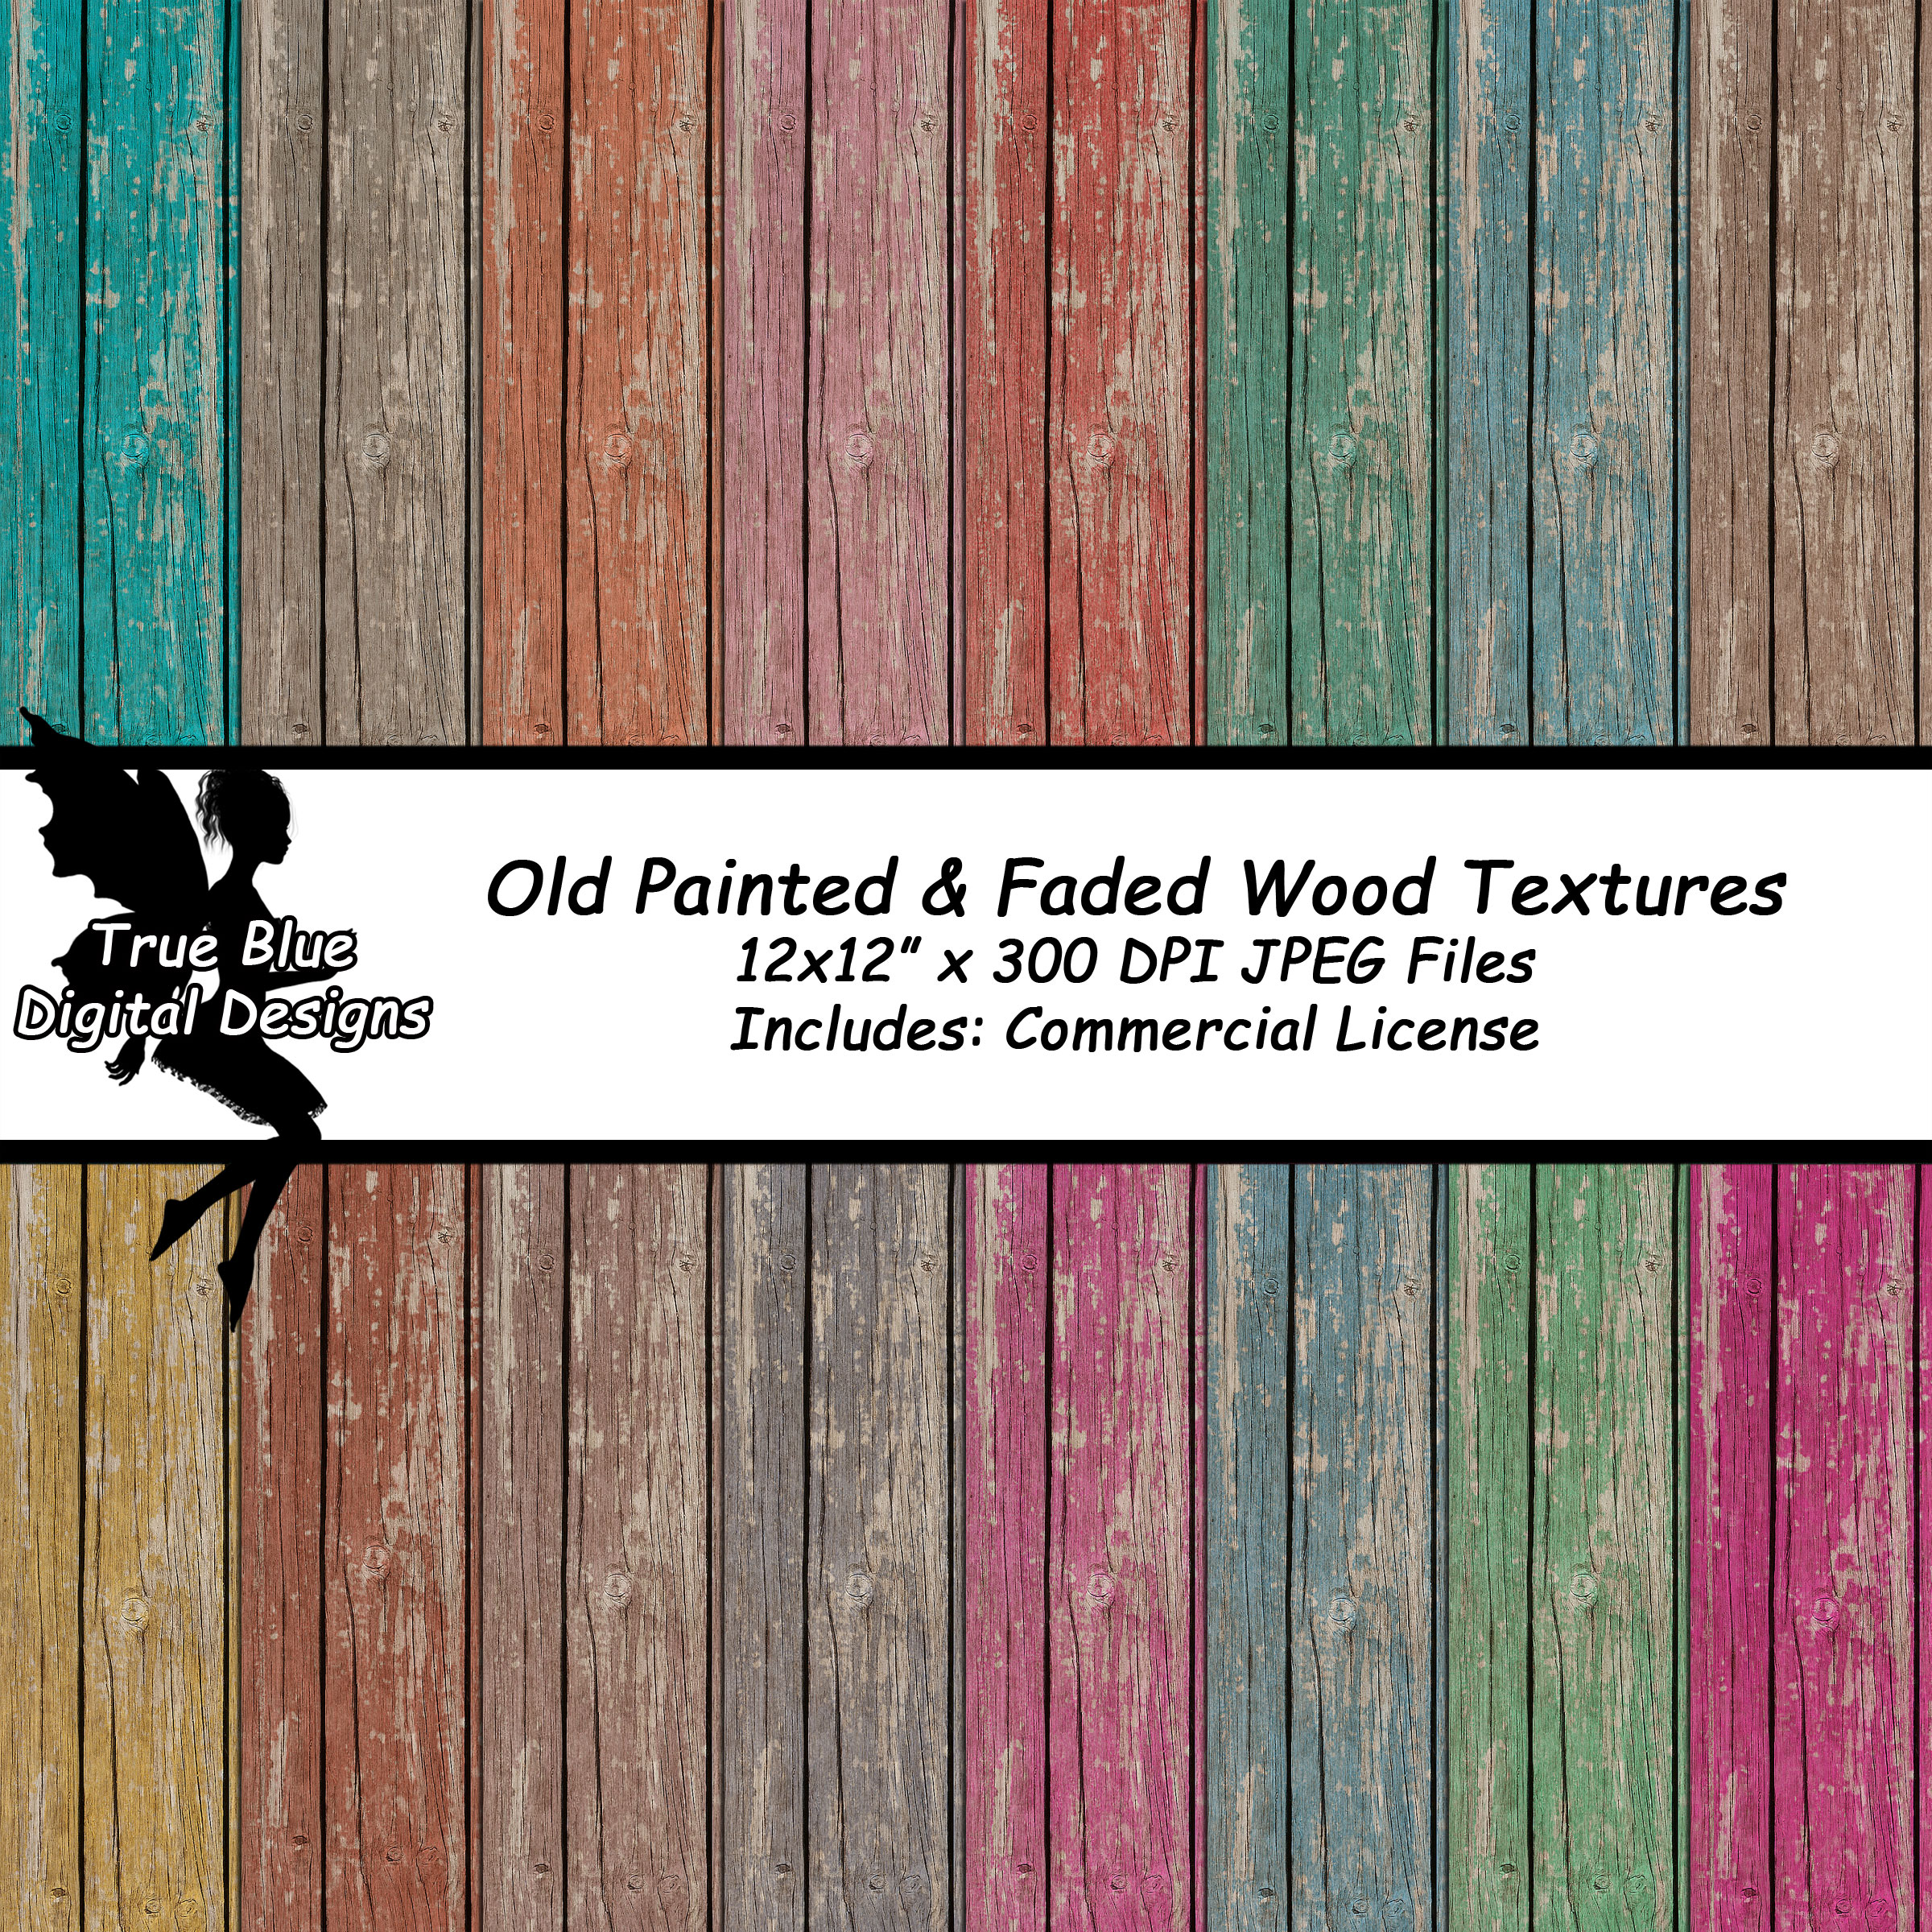 Old Painted & Faded Wood Textures